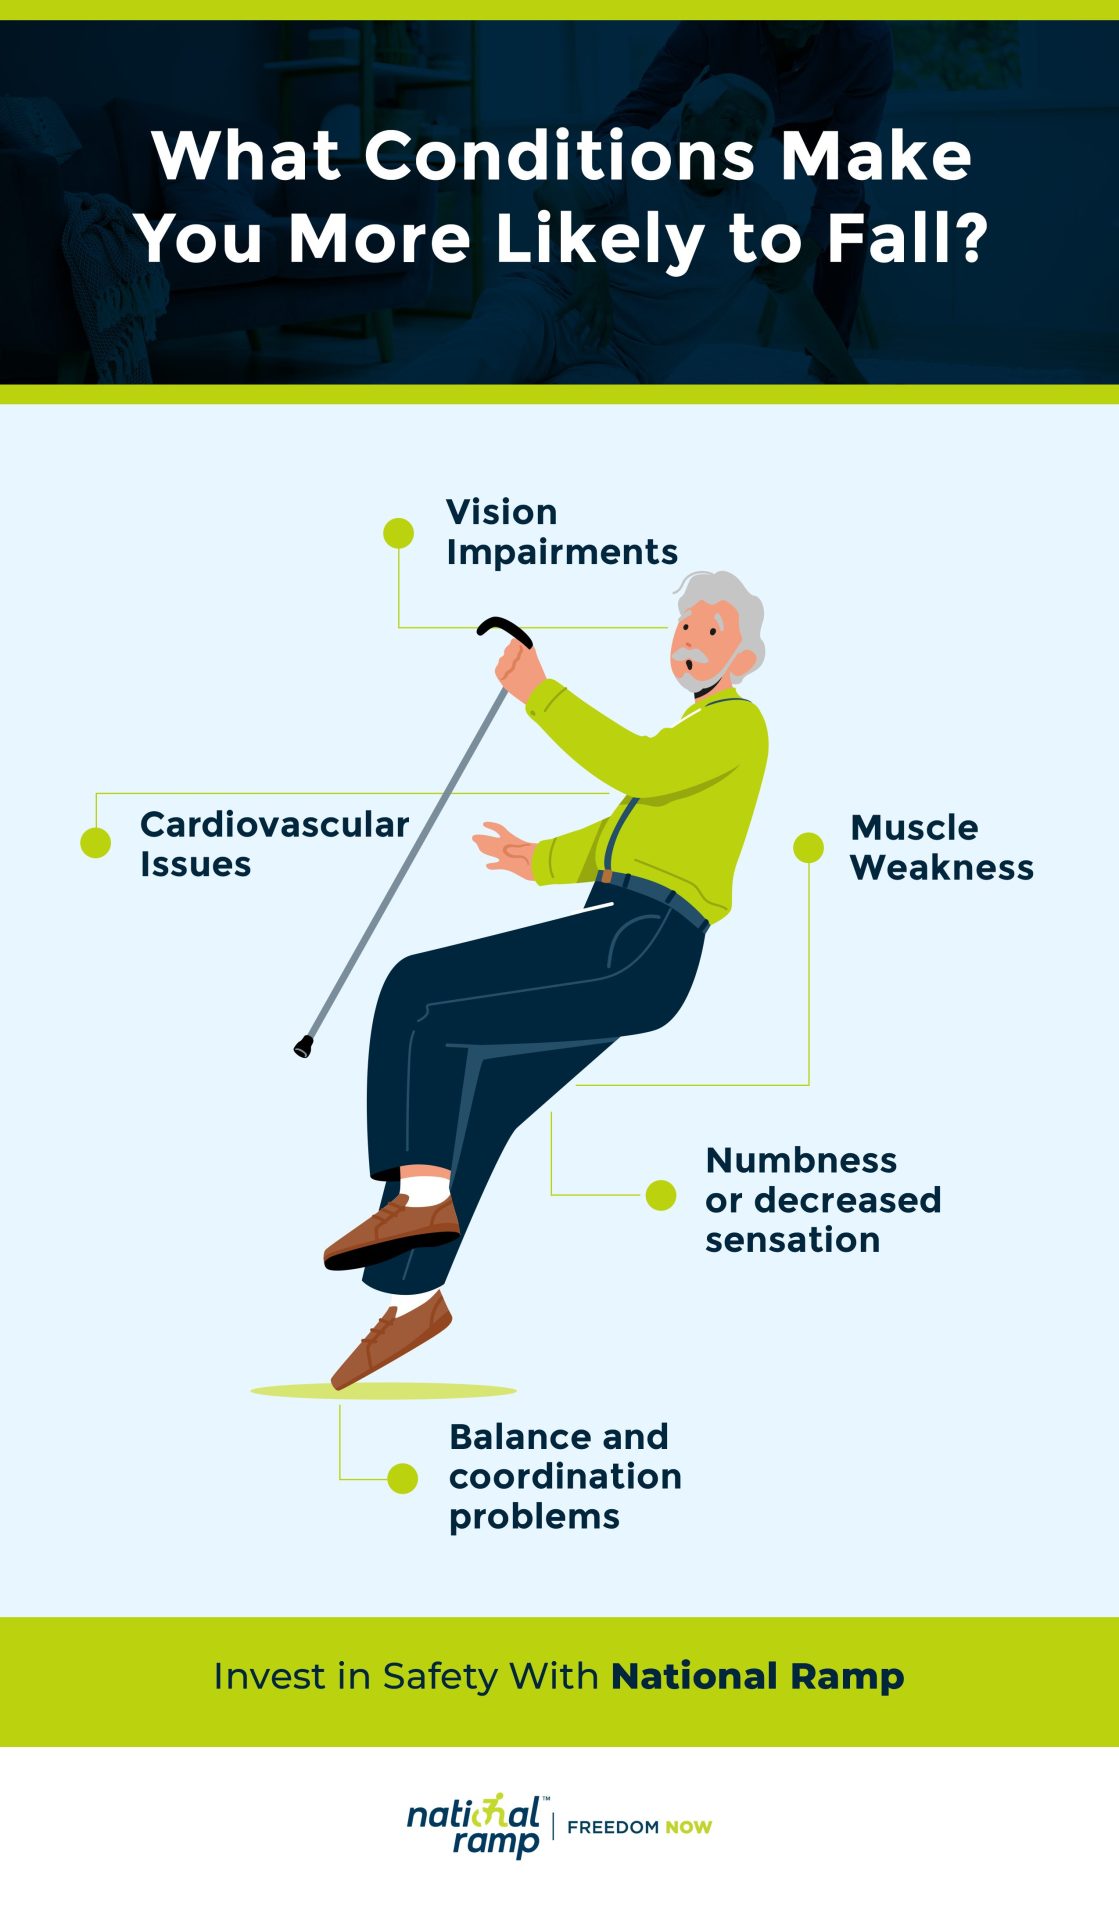 Why Do Older People Fall?